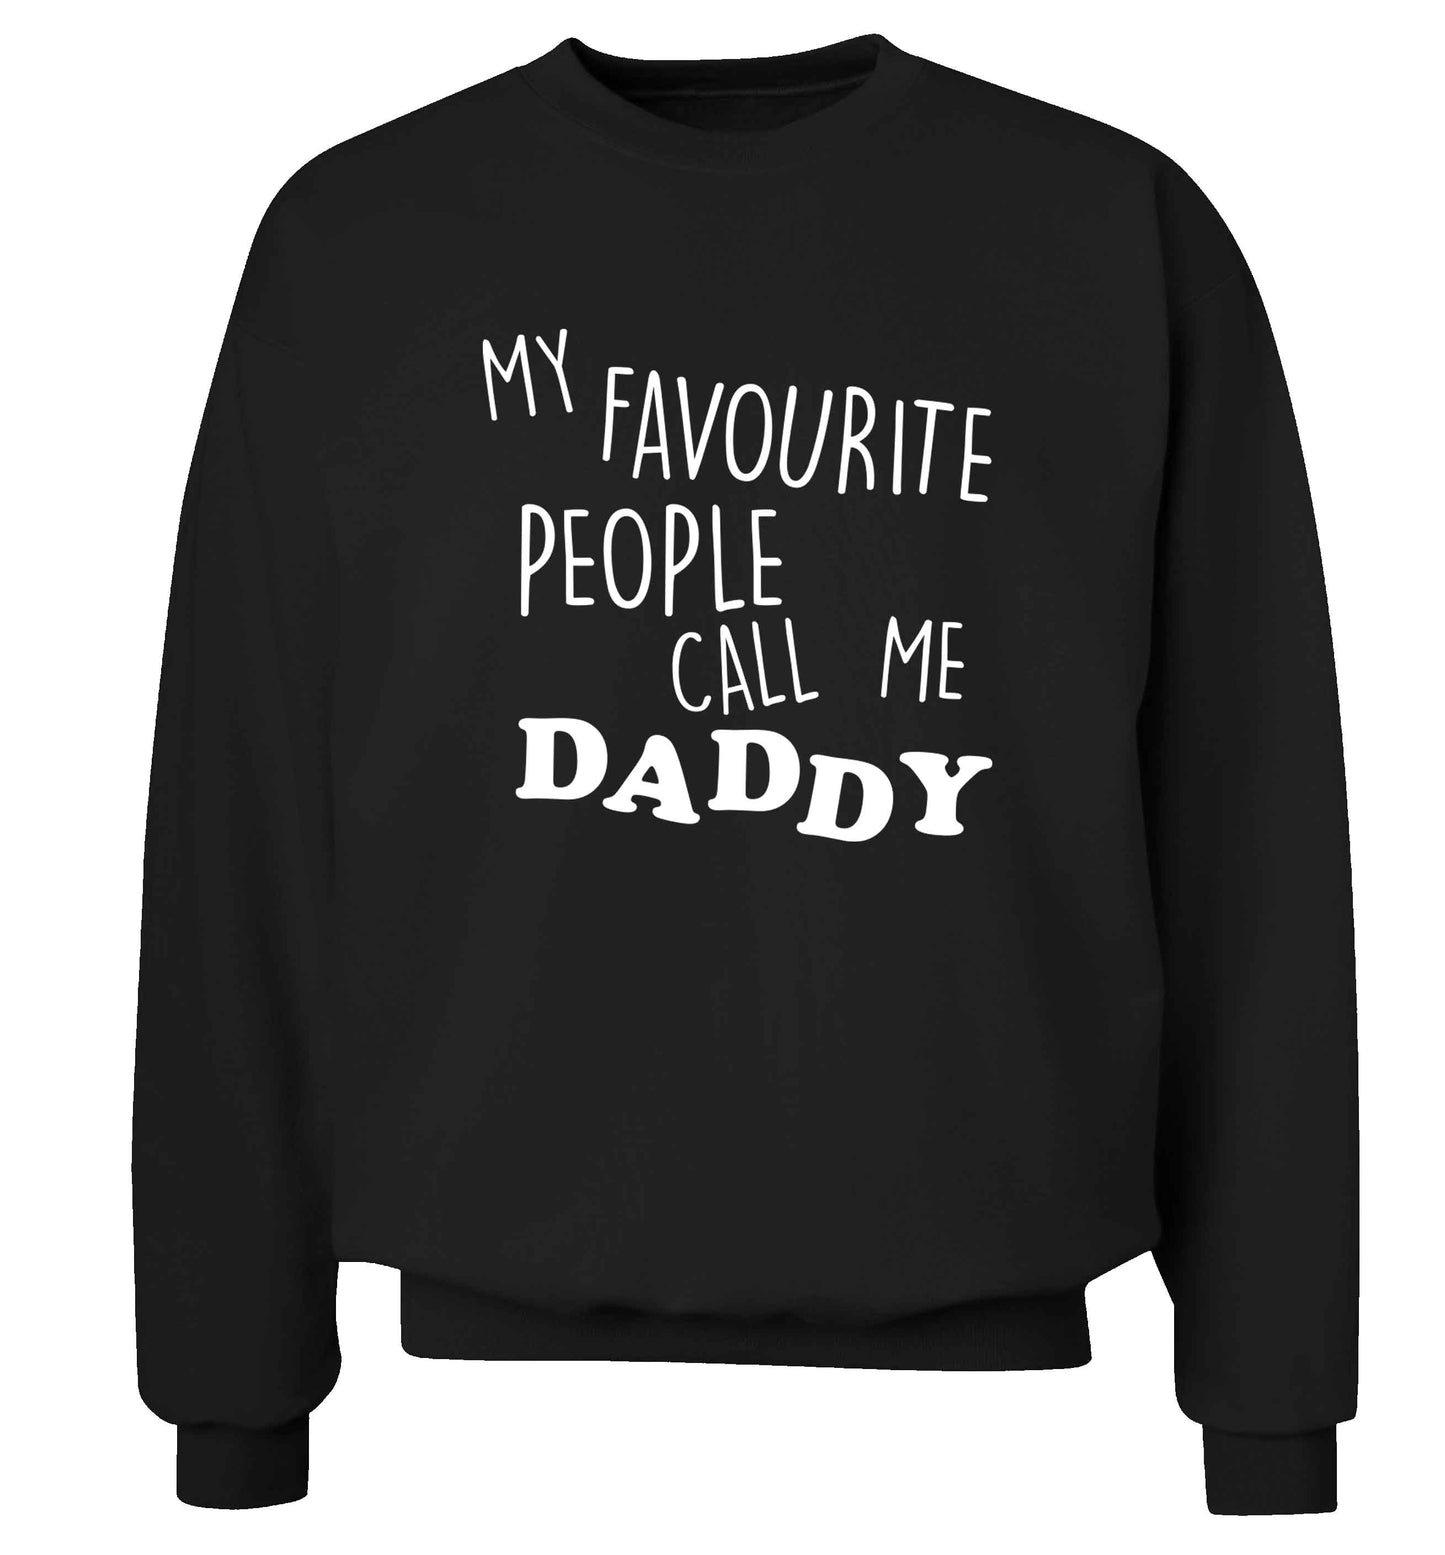 My favourite people call me daddy adult's unisex black sweater 2XL